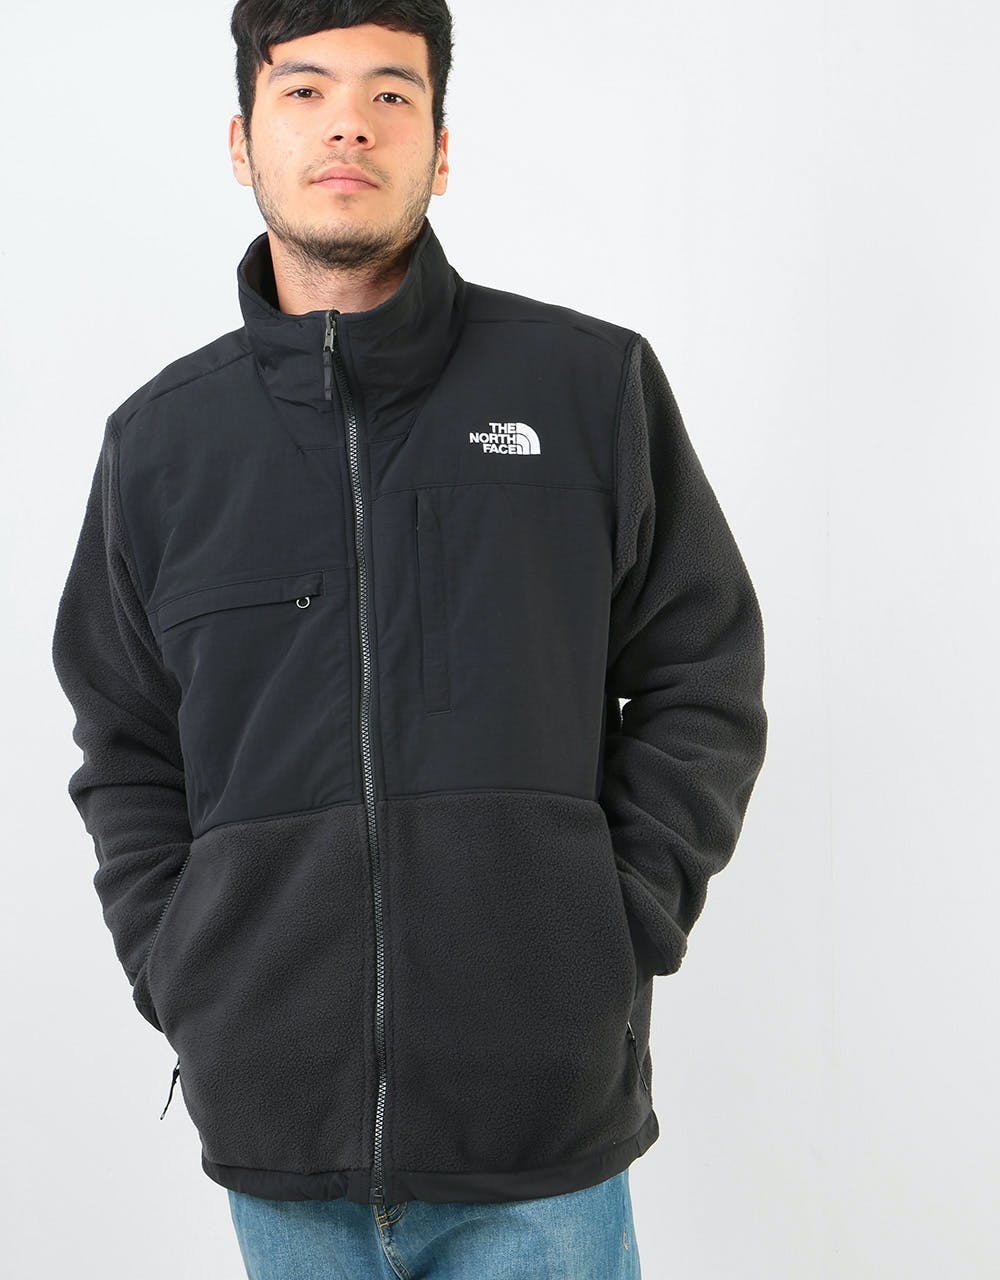 north face 2 in one jacket